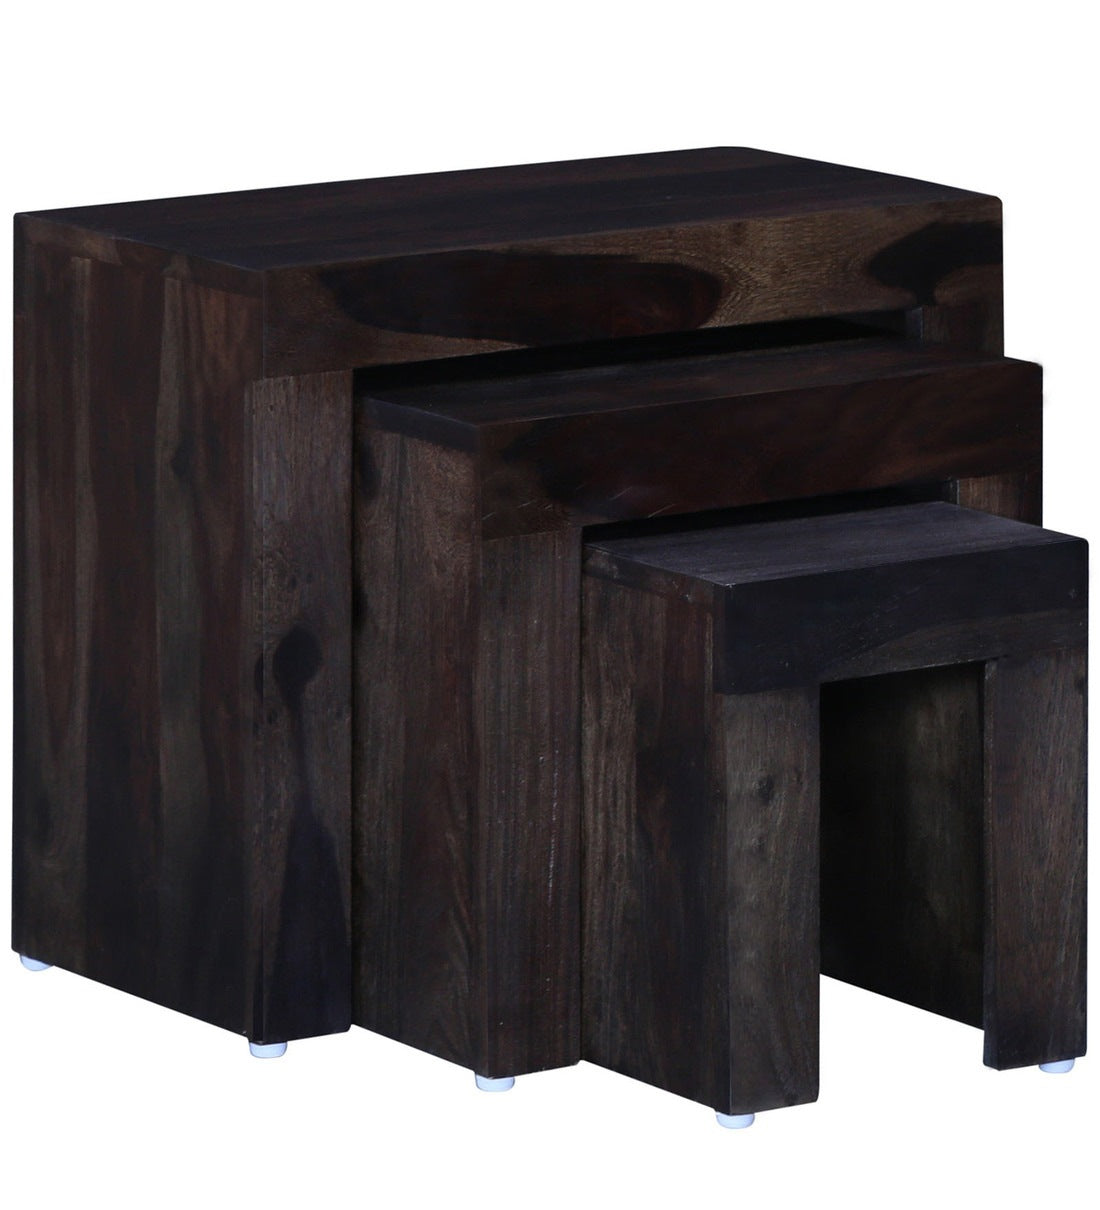 Acro Solid Wood Nest of Tables for Living Room - Rajwada Furnish